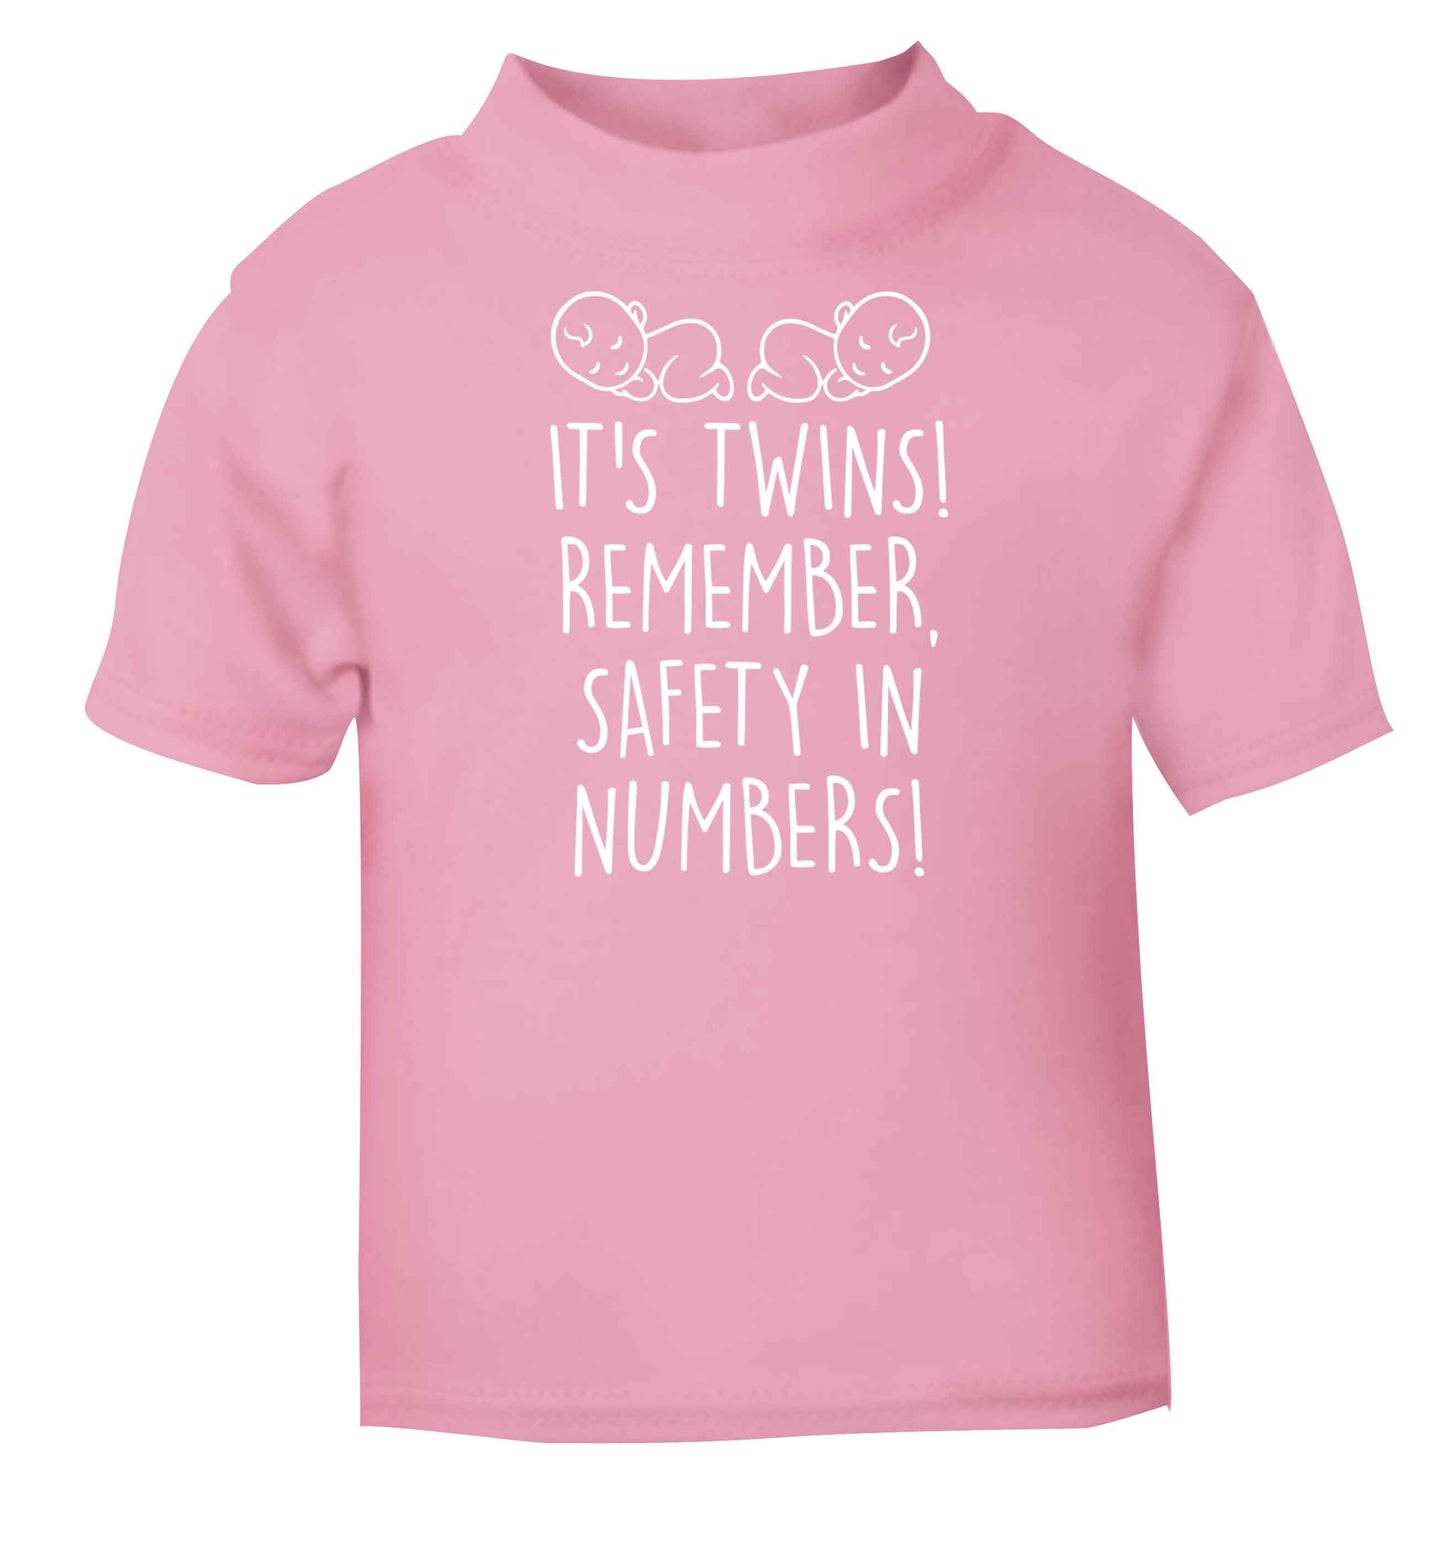 It's twins! Remember safety in numbers! light pink baby toddler Tshirt 2 Years